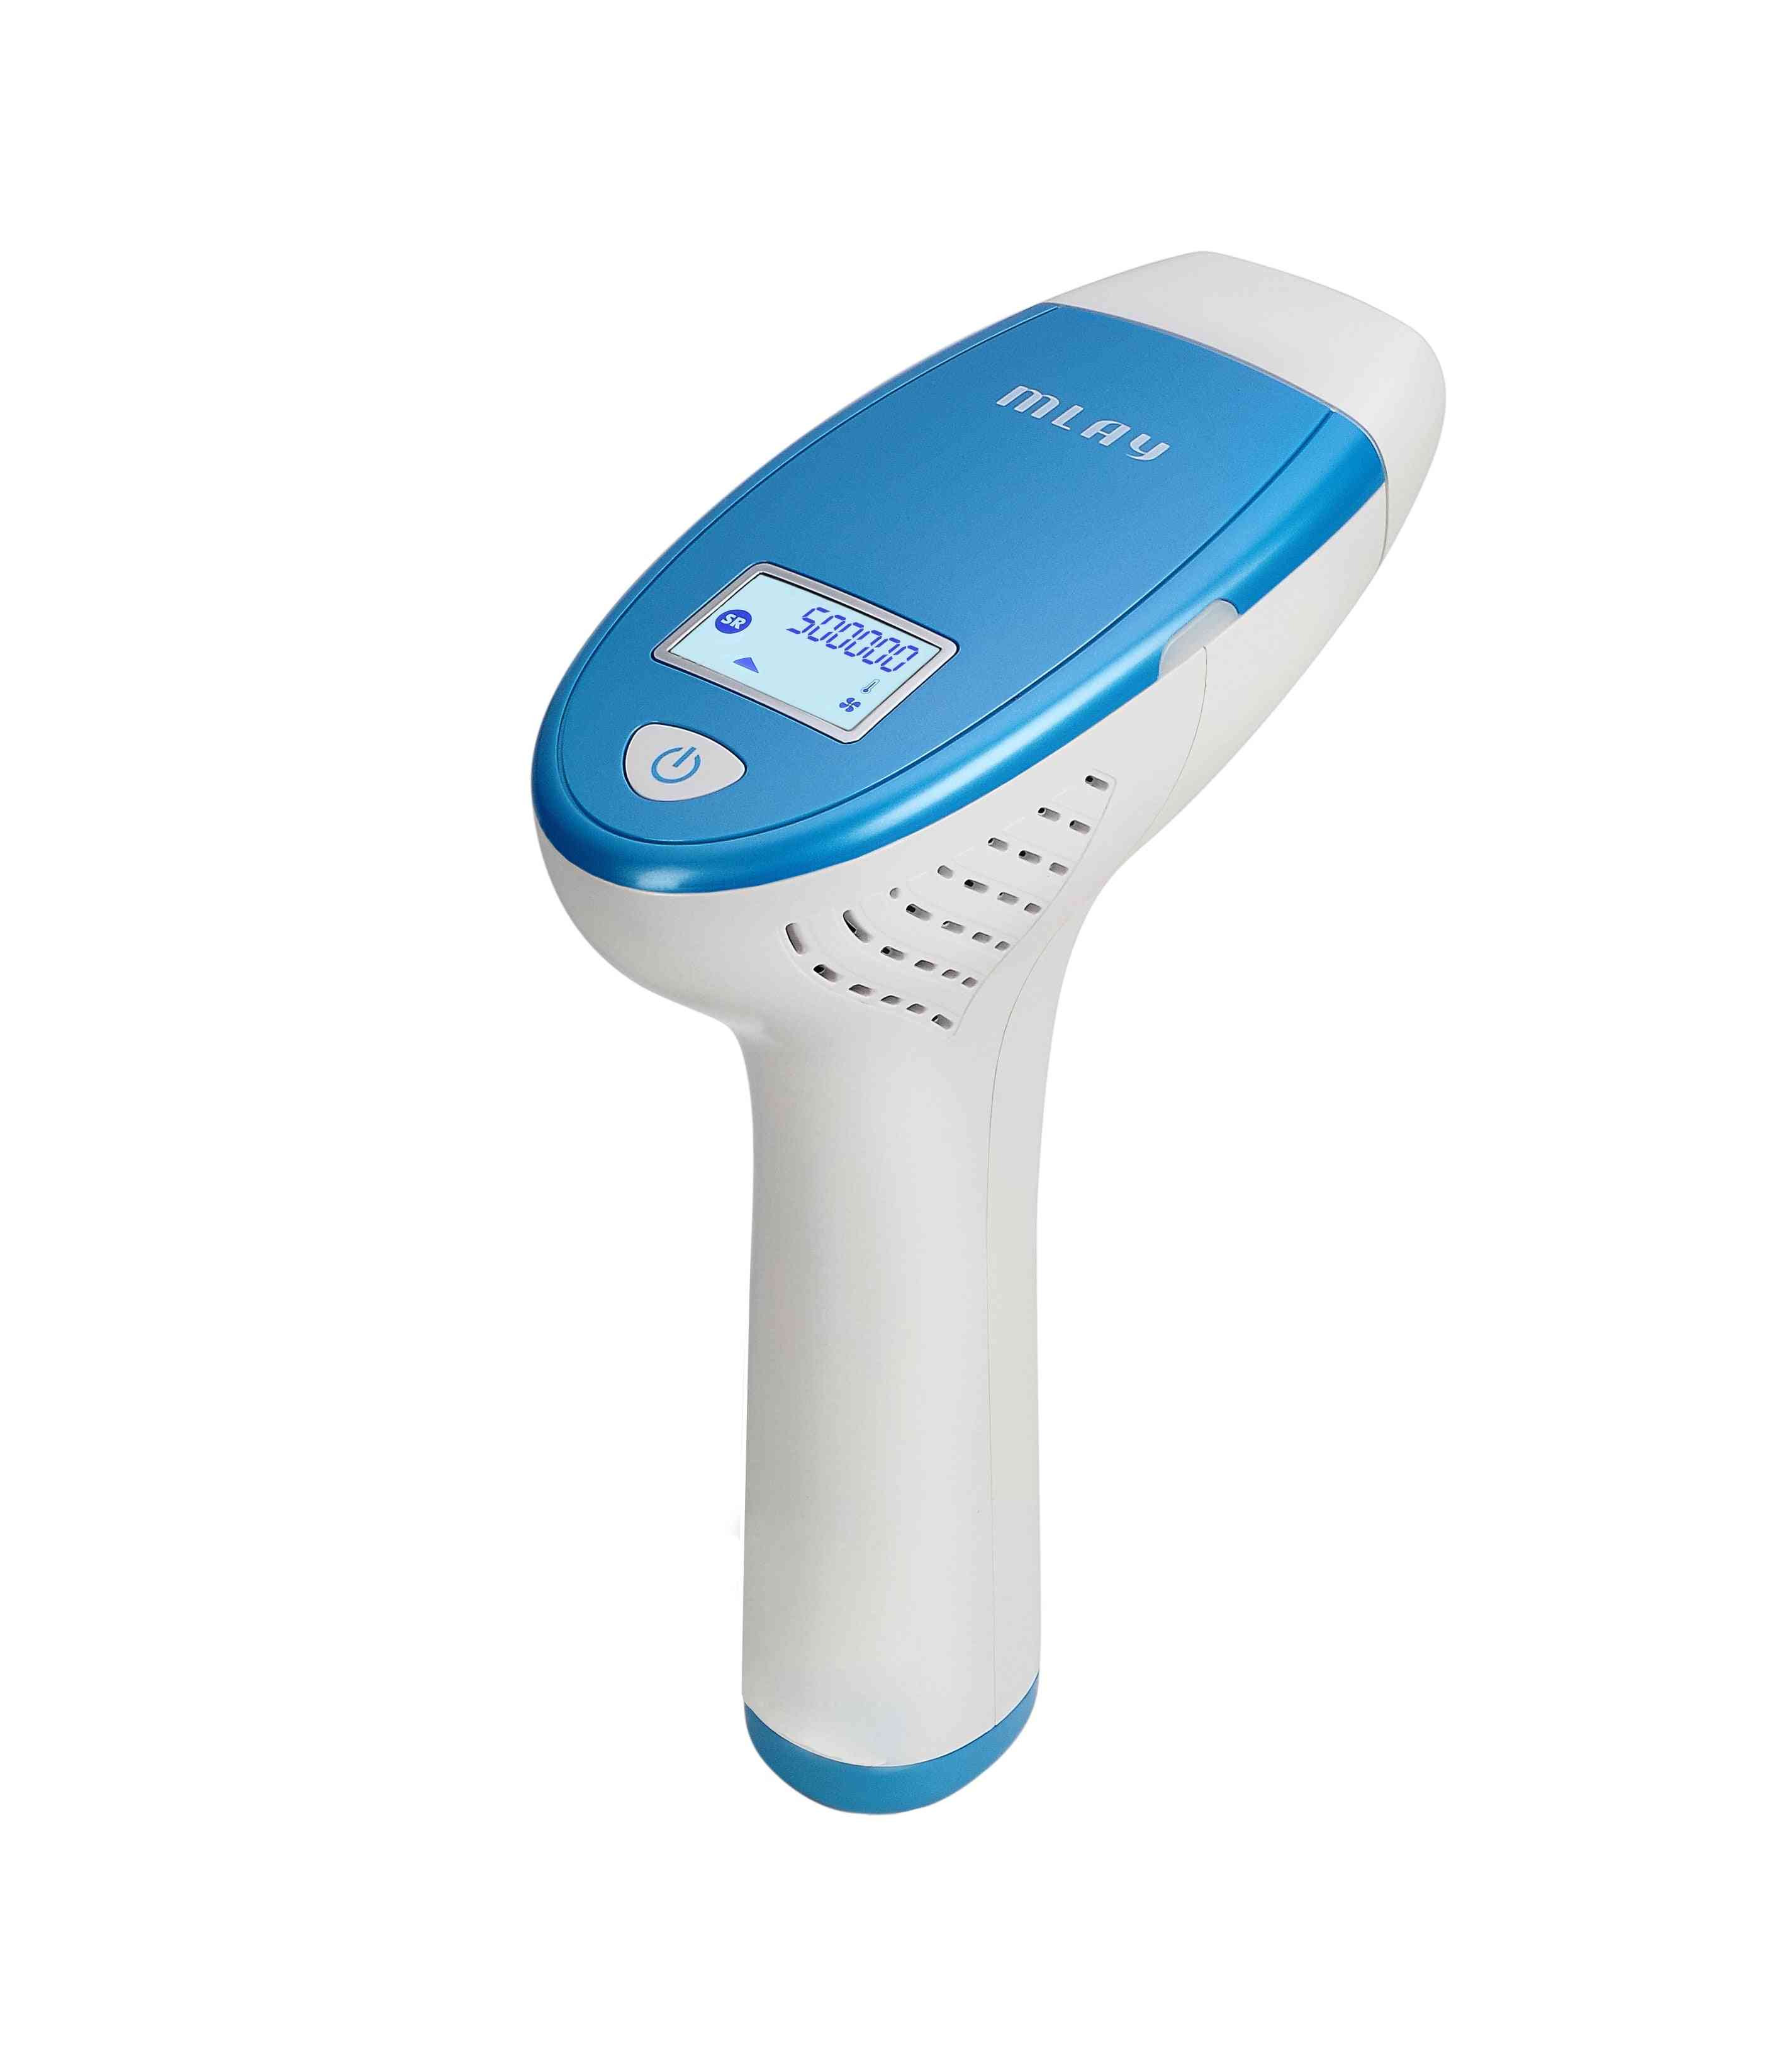 Portable Home Use Skin Rejuvenation Ipl Laser Hair Removal Machine With One Hair Removal Lamp